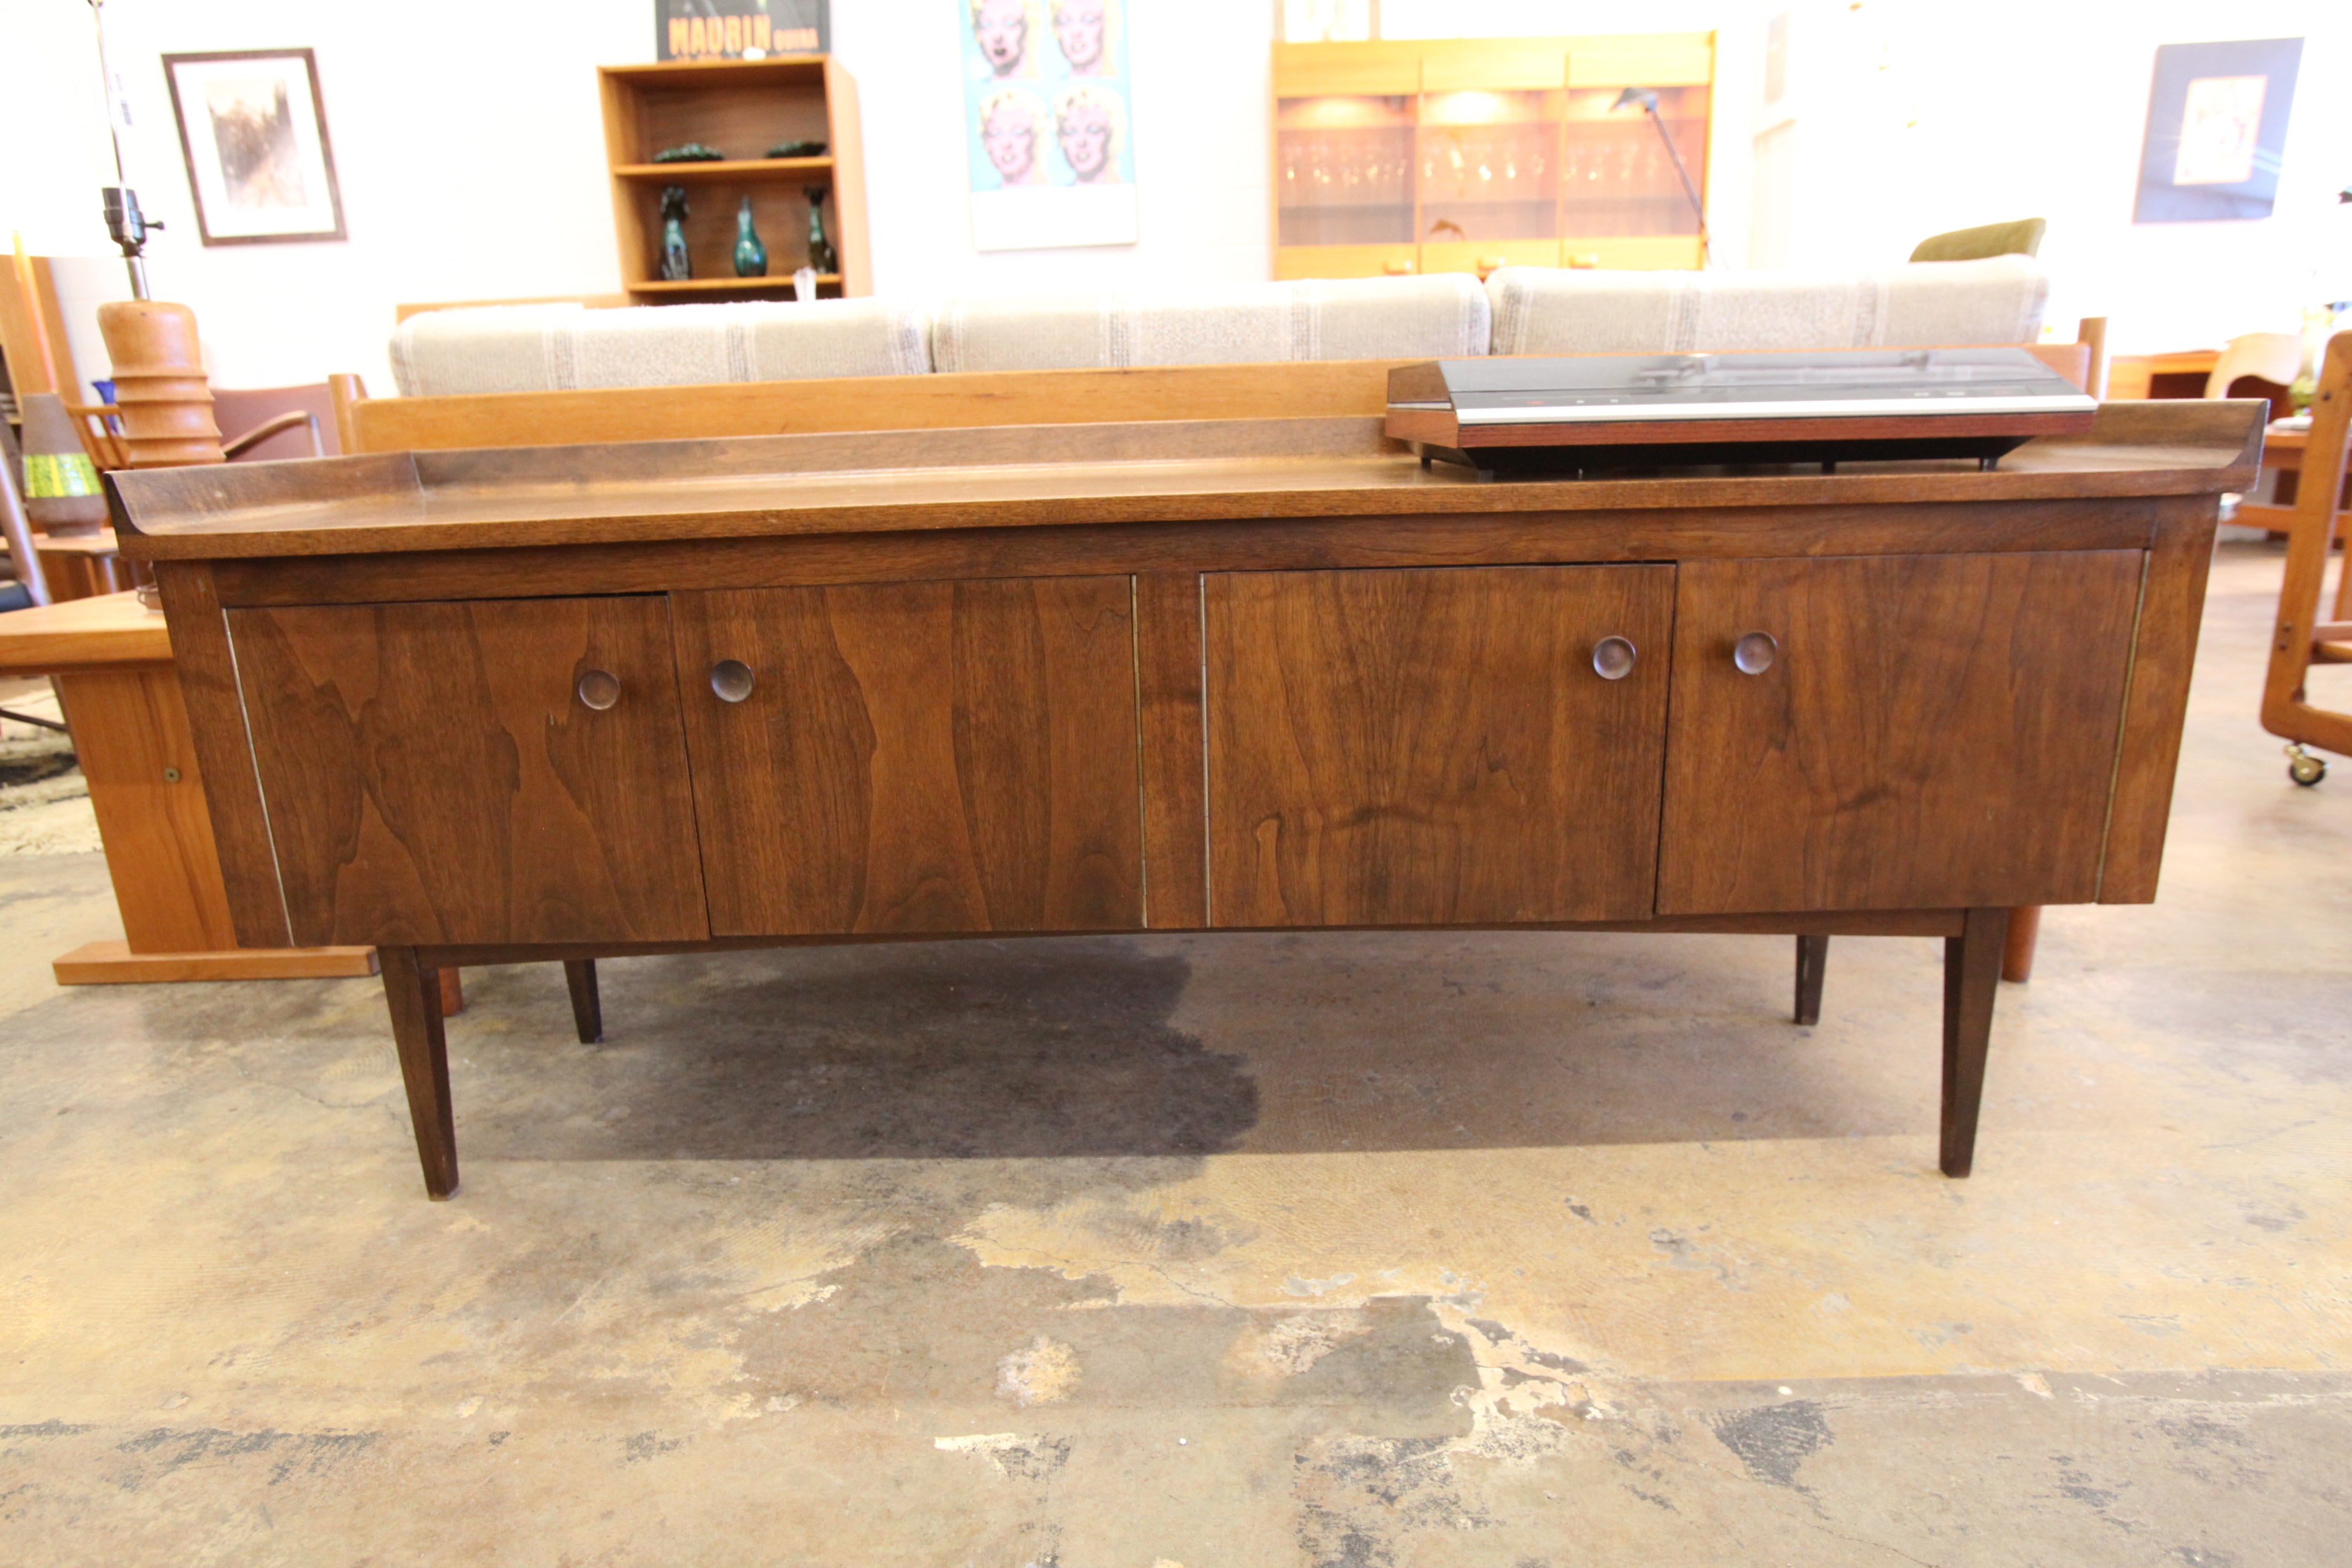 Vintage Walnut Sideboard / Entertainment Stand (59.75"W x 15.75"D x 24.75"H)